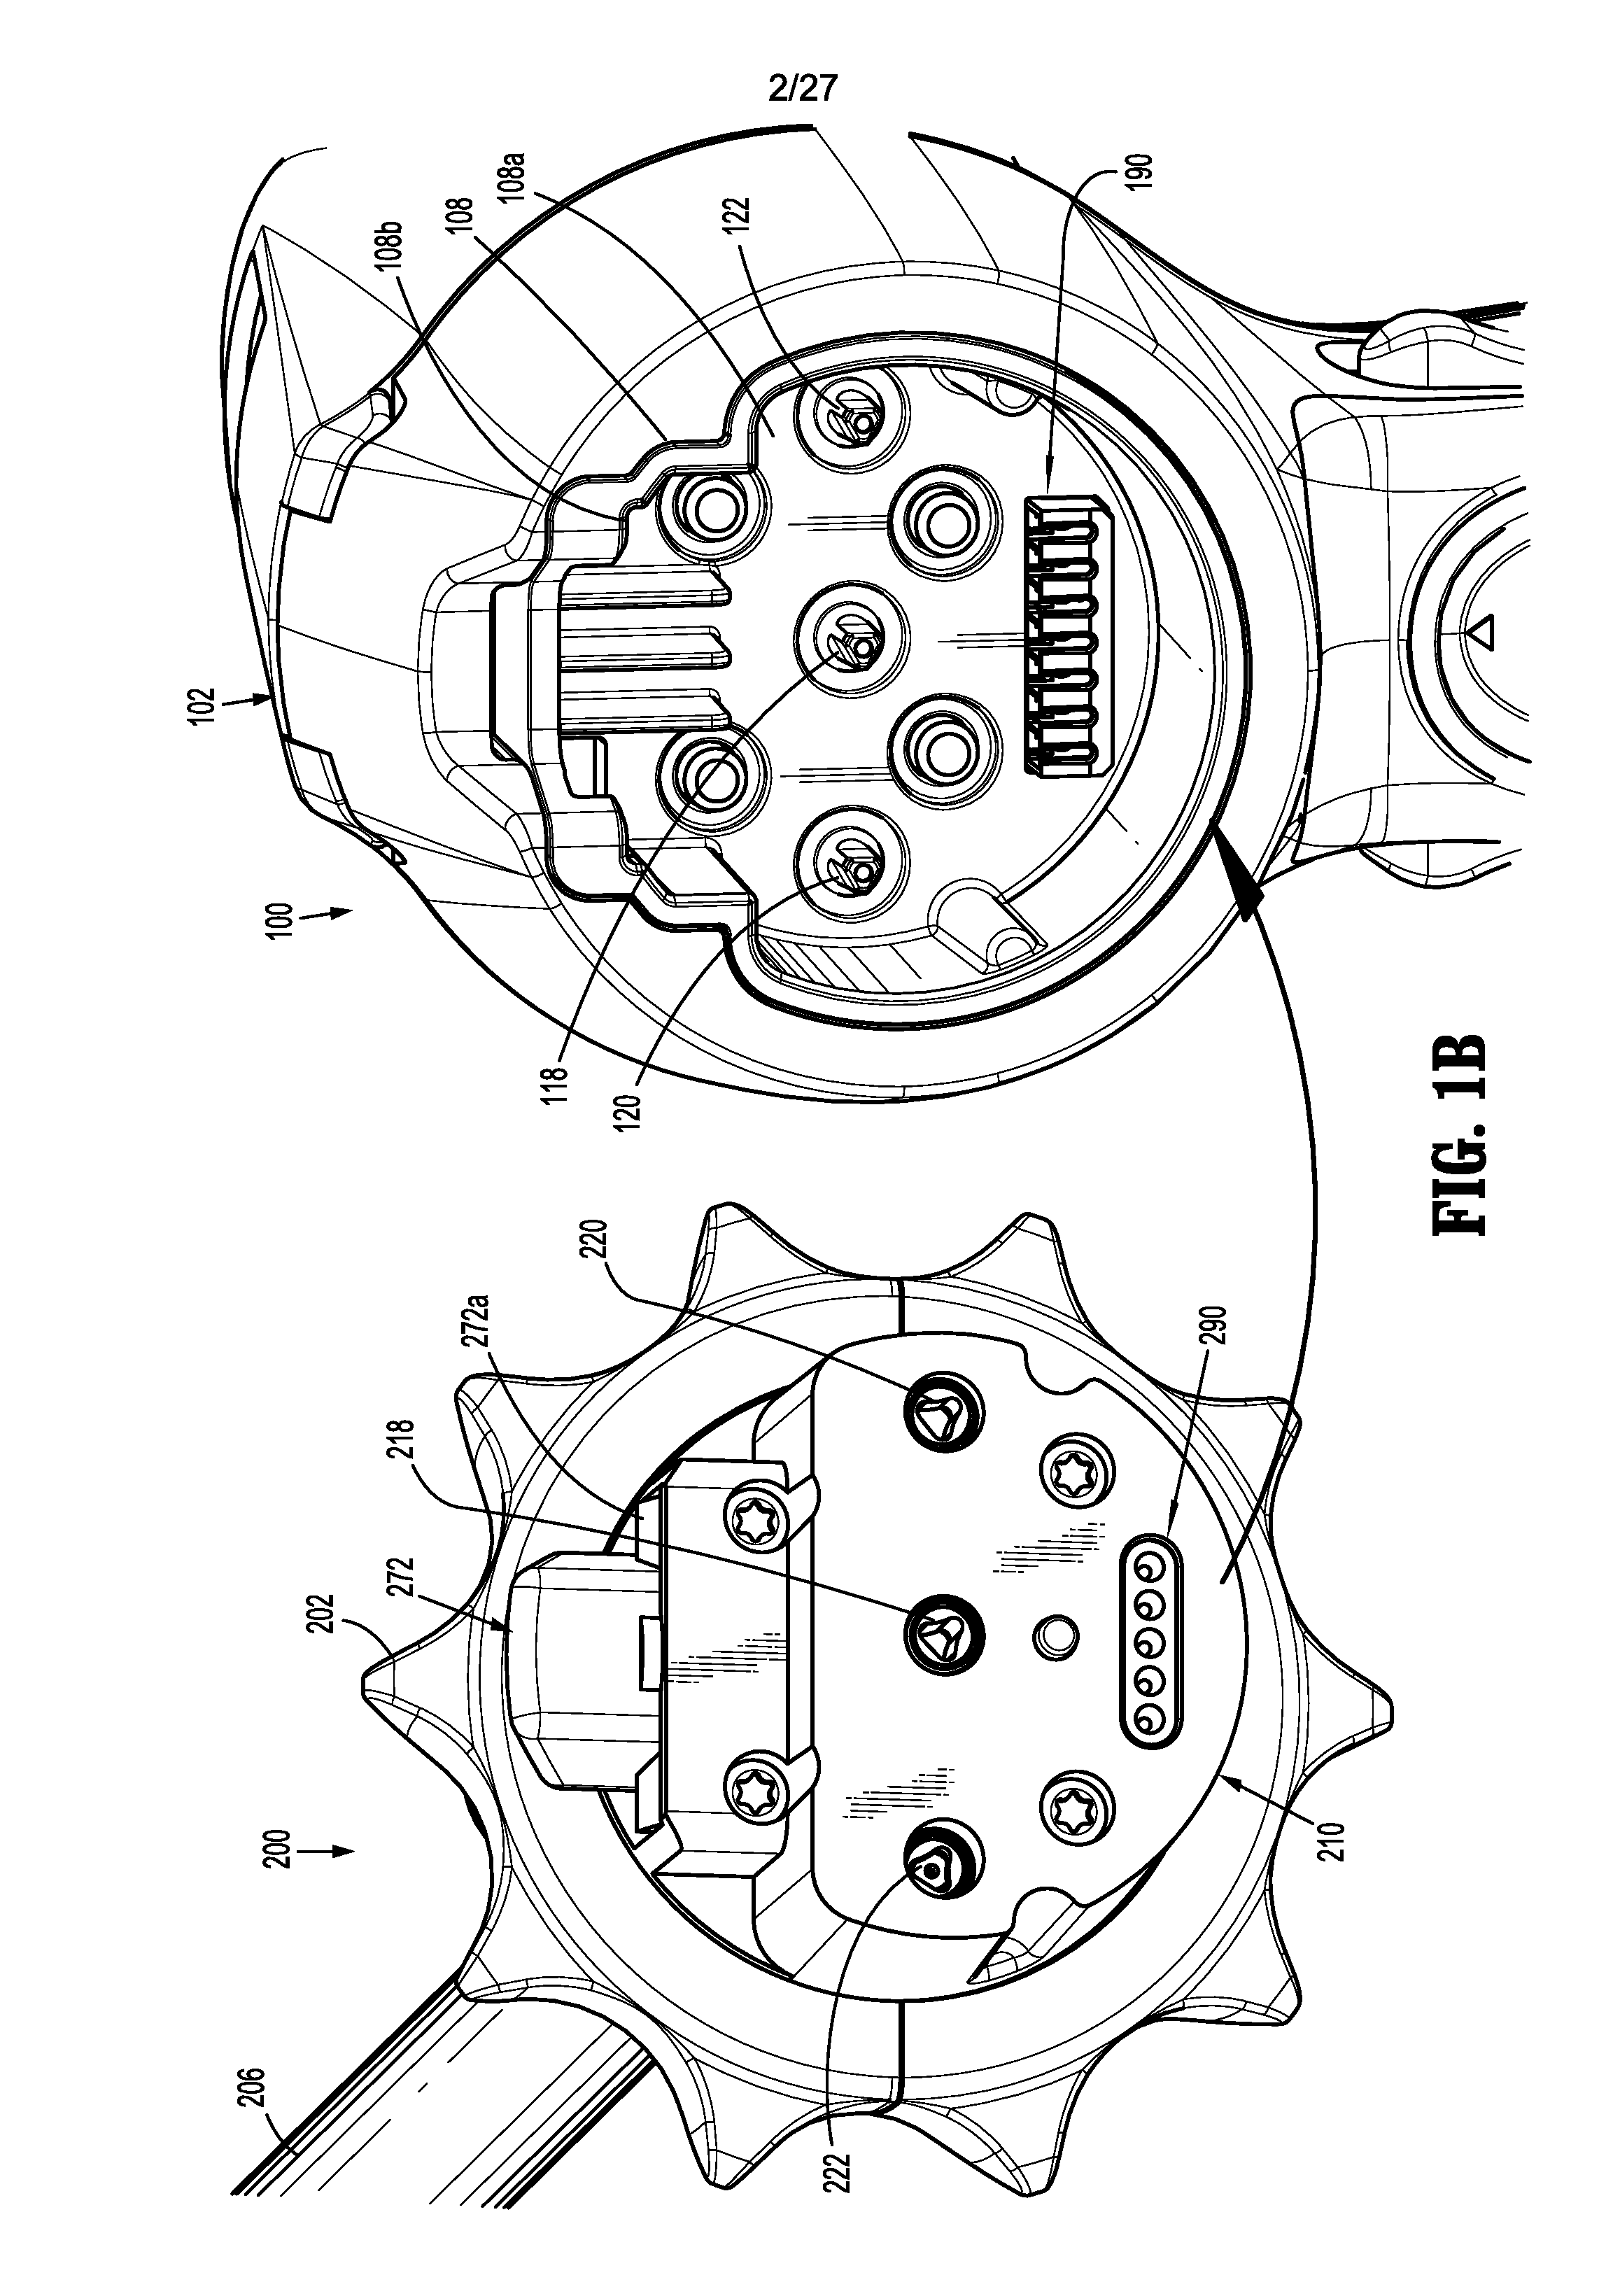 Adapter assembly for interconnecting electromechanical surgical devices and surgical loading units, and surgical systems thereof